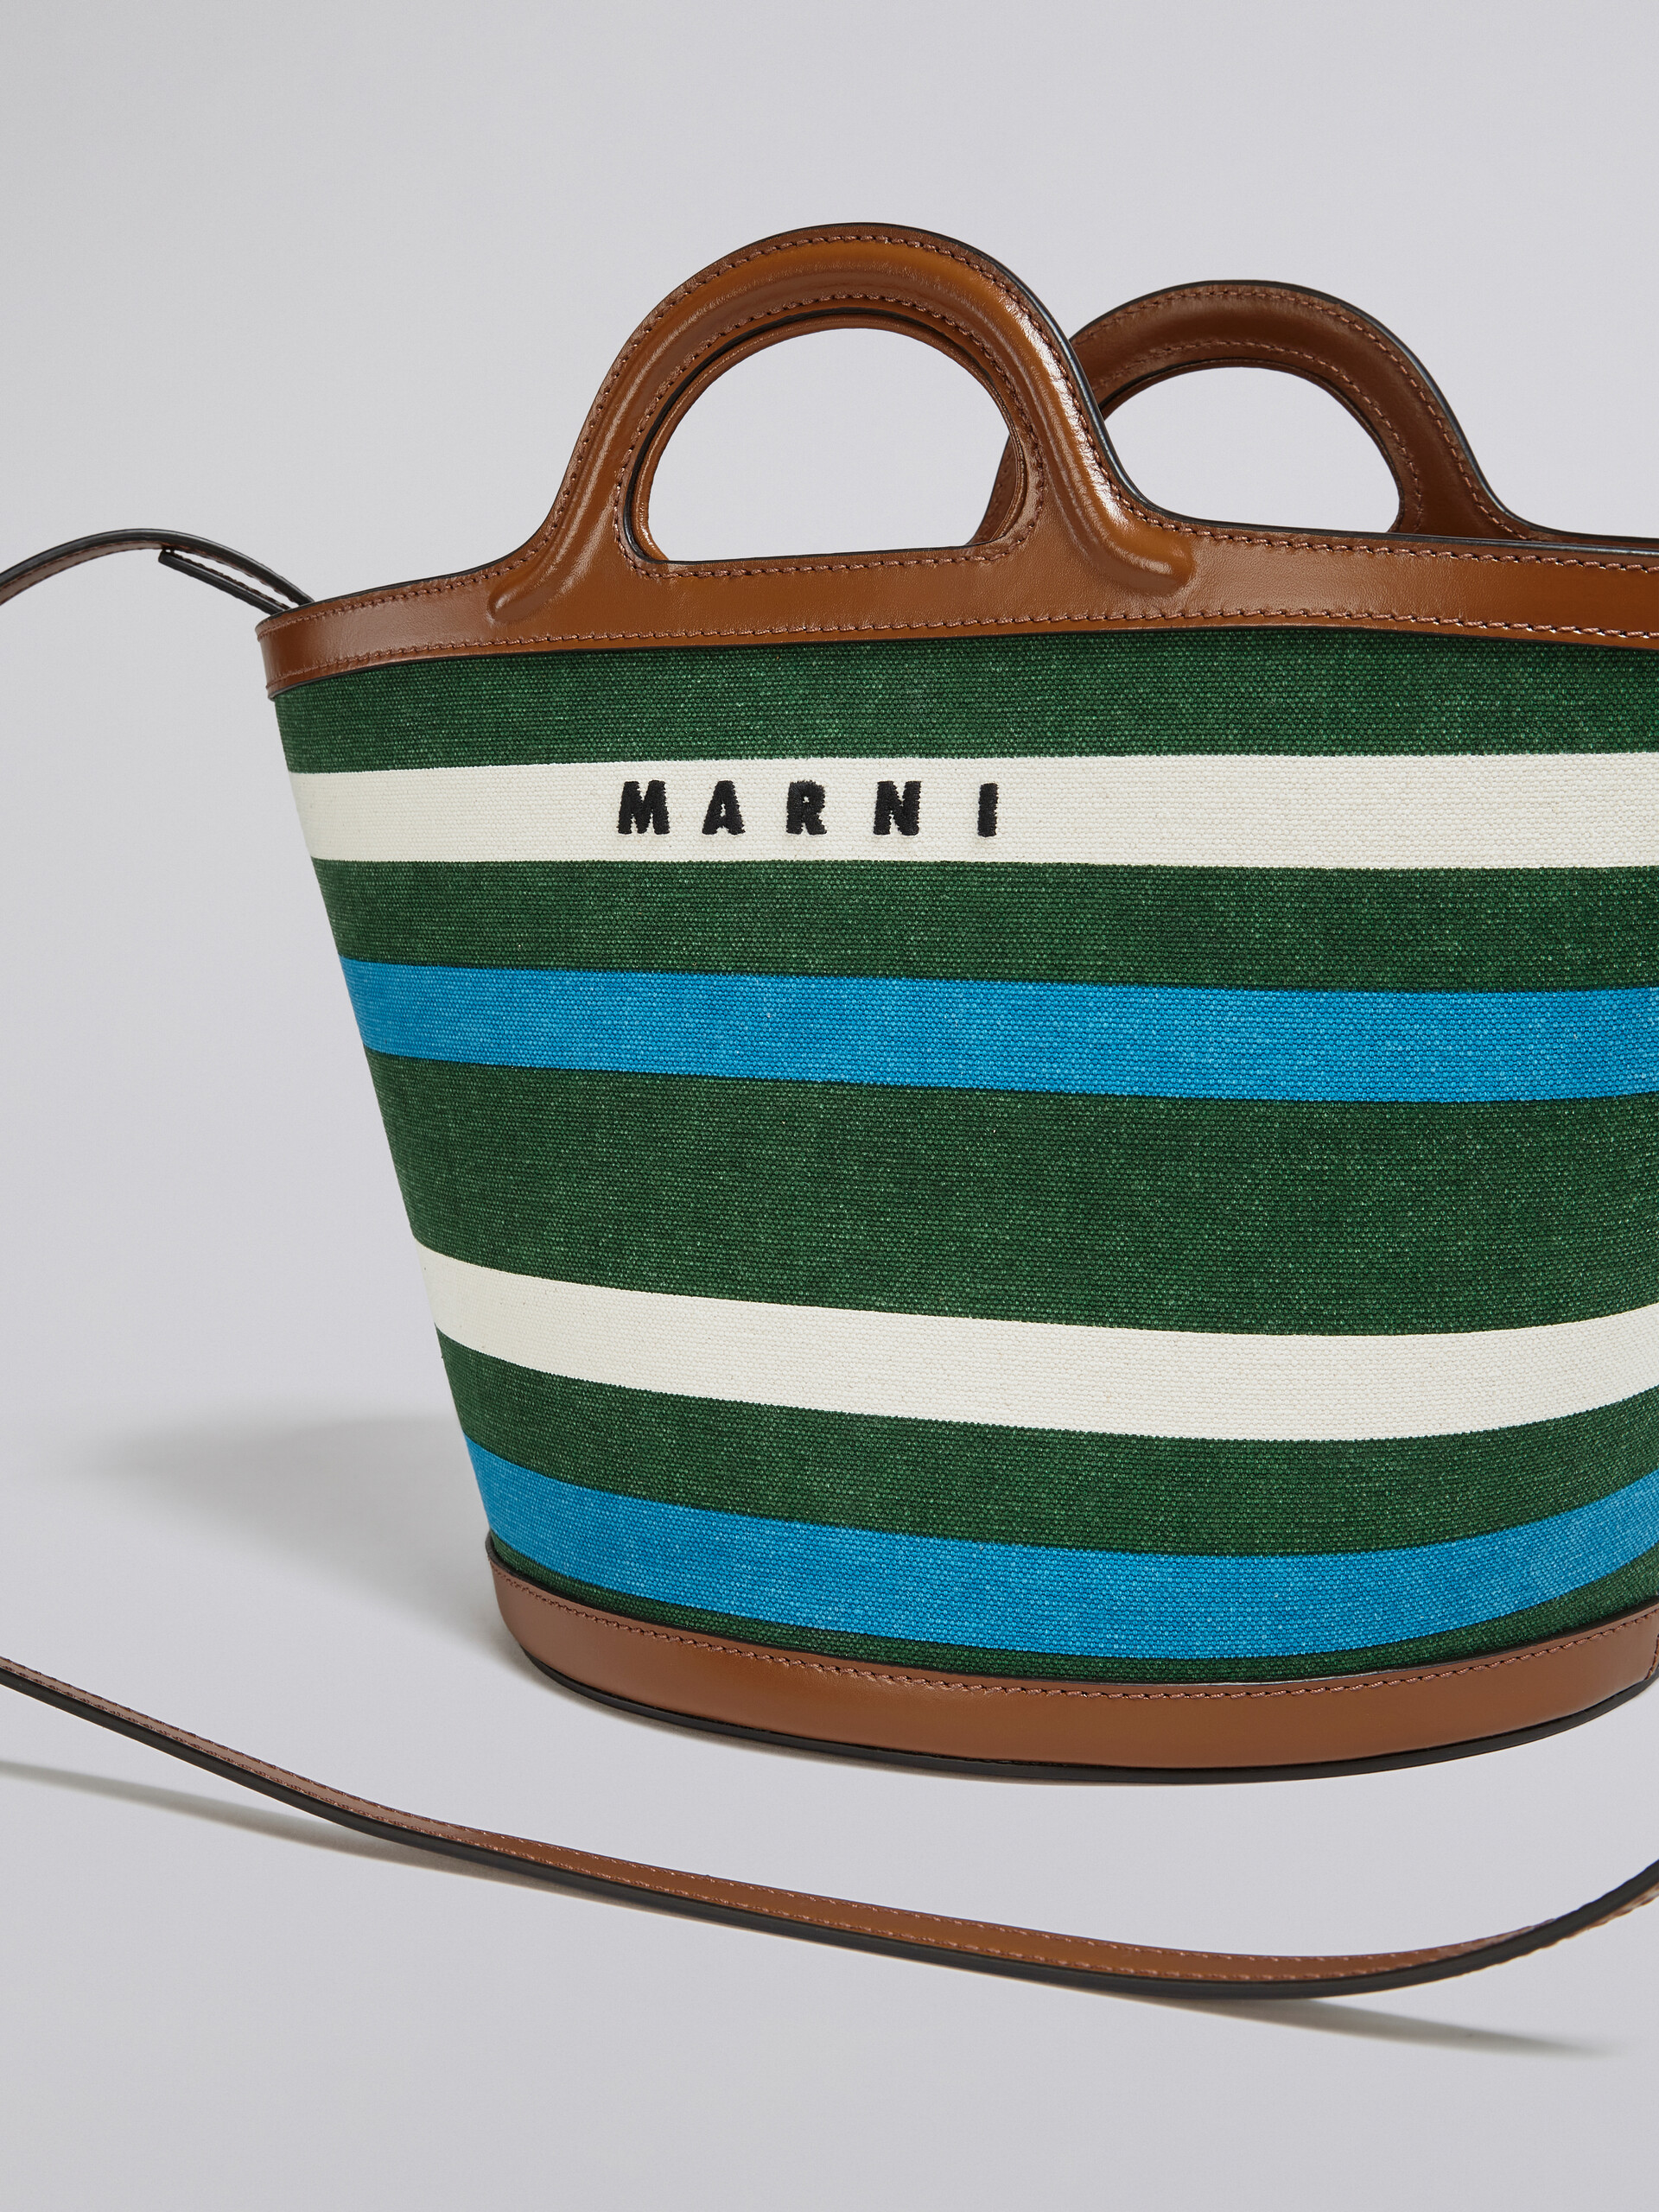 TROPICALIA small bag in leather and striped canvas - Handbags - Image 5